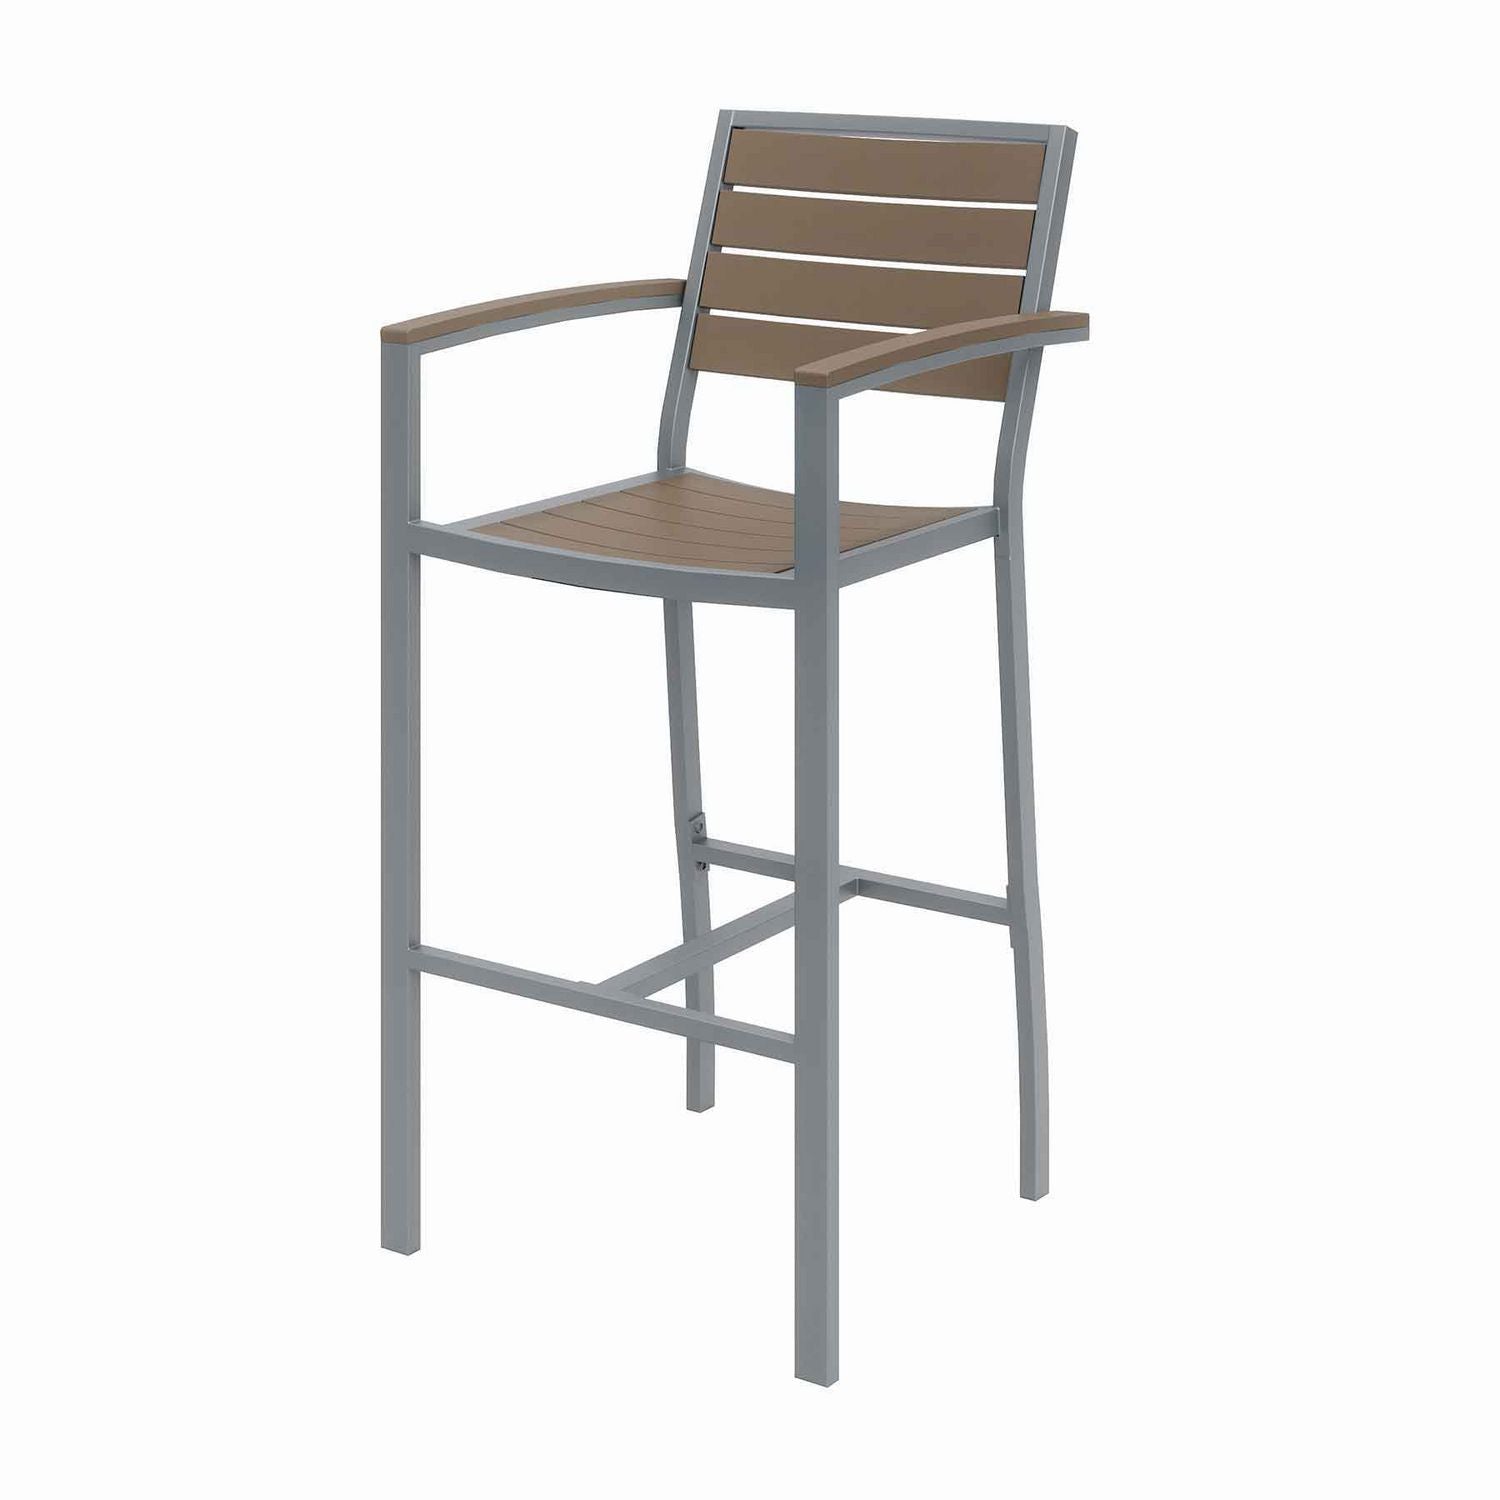 eveleen-outdoor-bistro-patio-table-2-mocha-powder-coated-polymer-barstools-round-30-dia-x-41h-grayships-in-4-6-bus-days_kfi840031918468 - 3